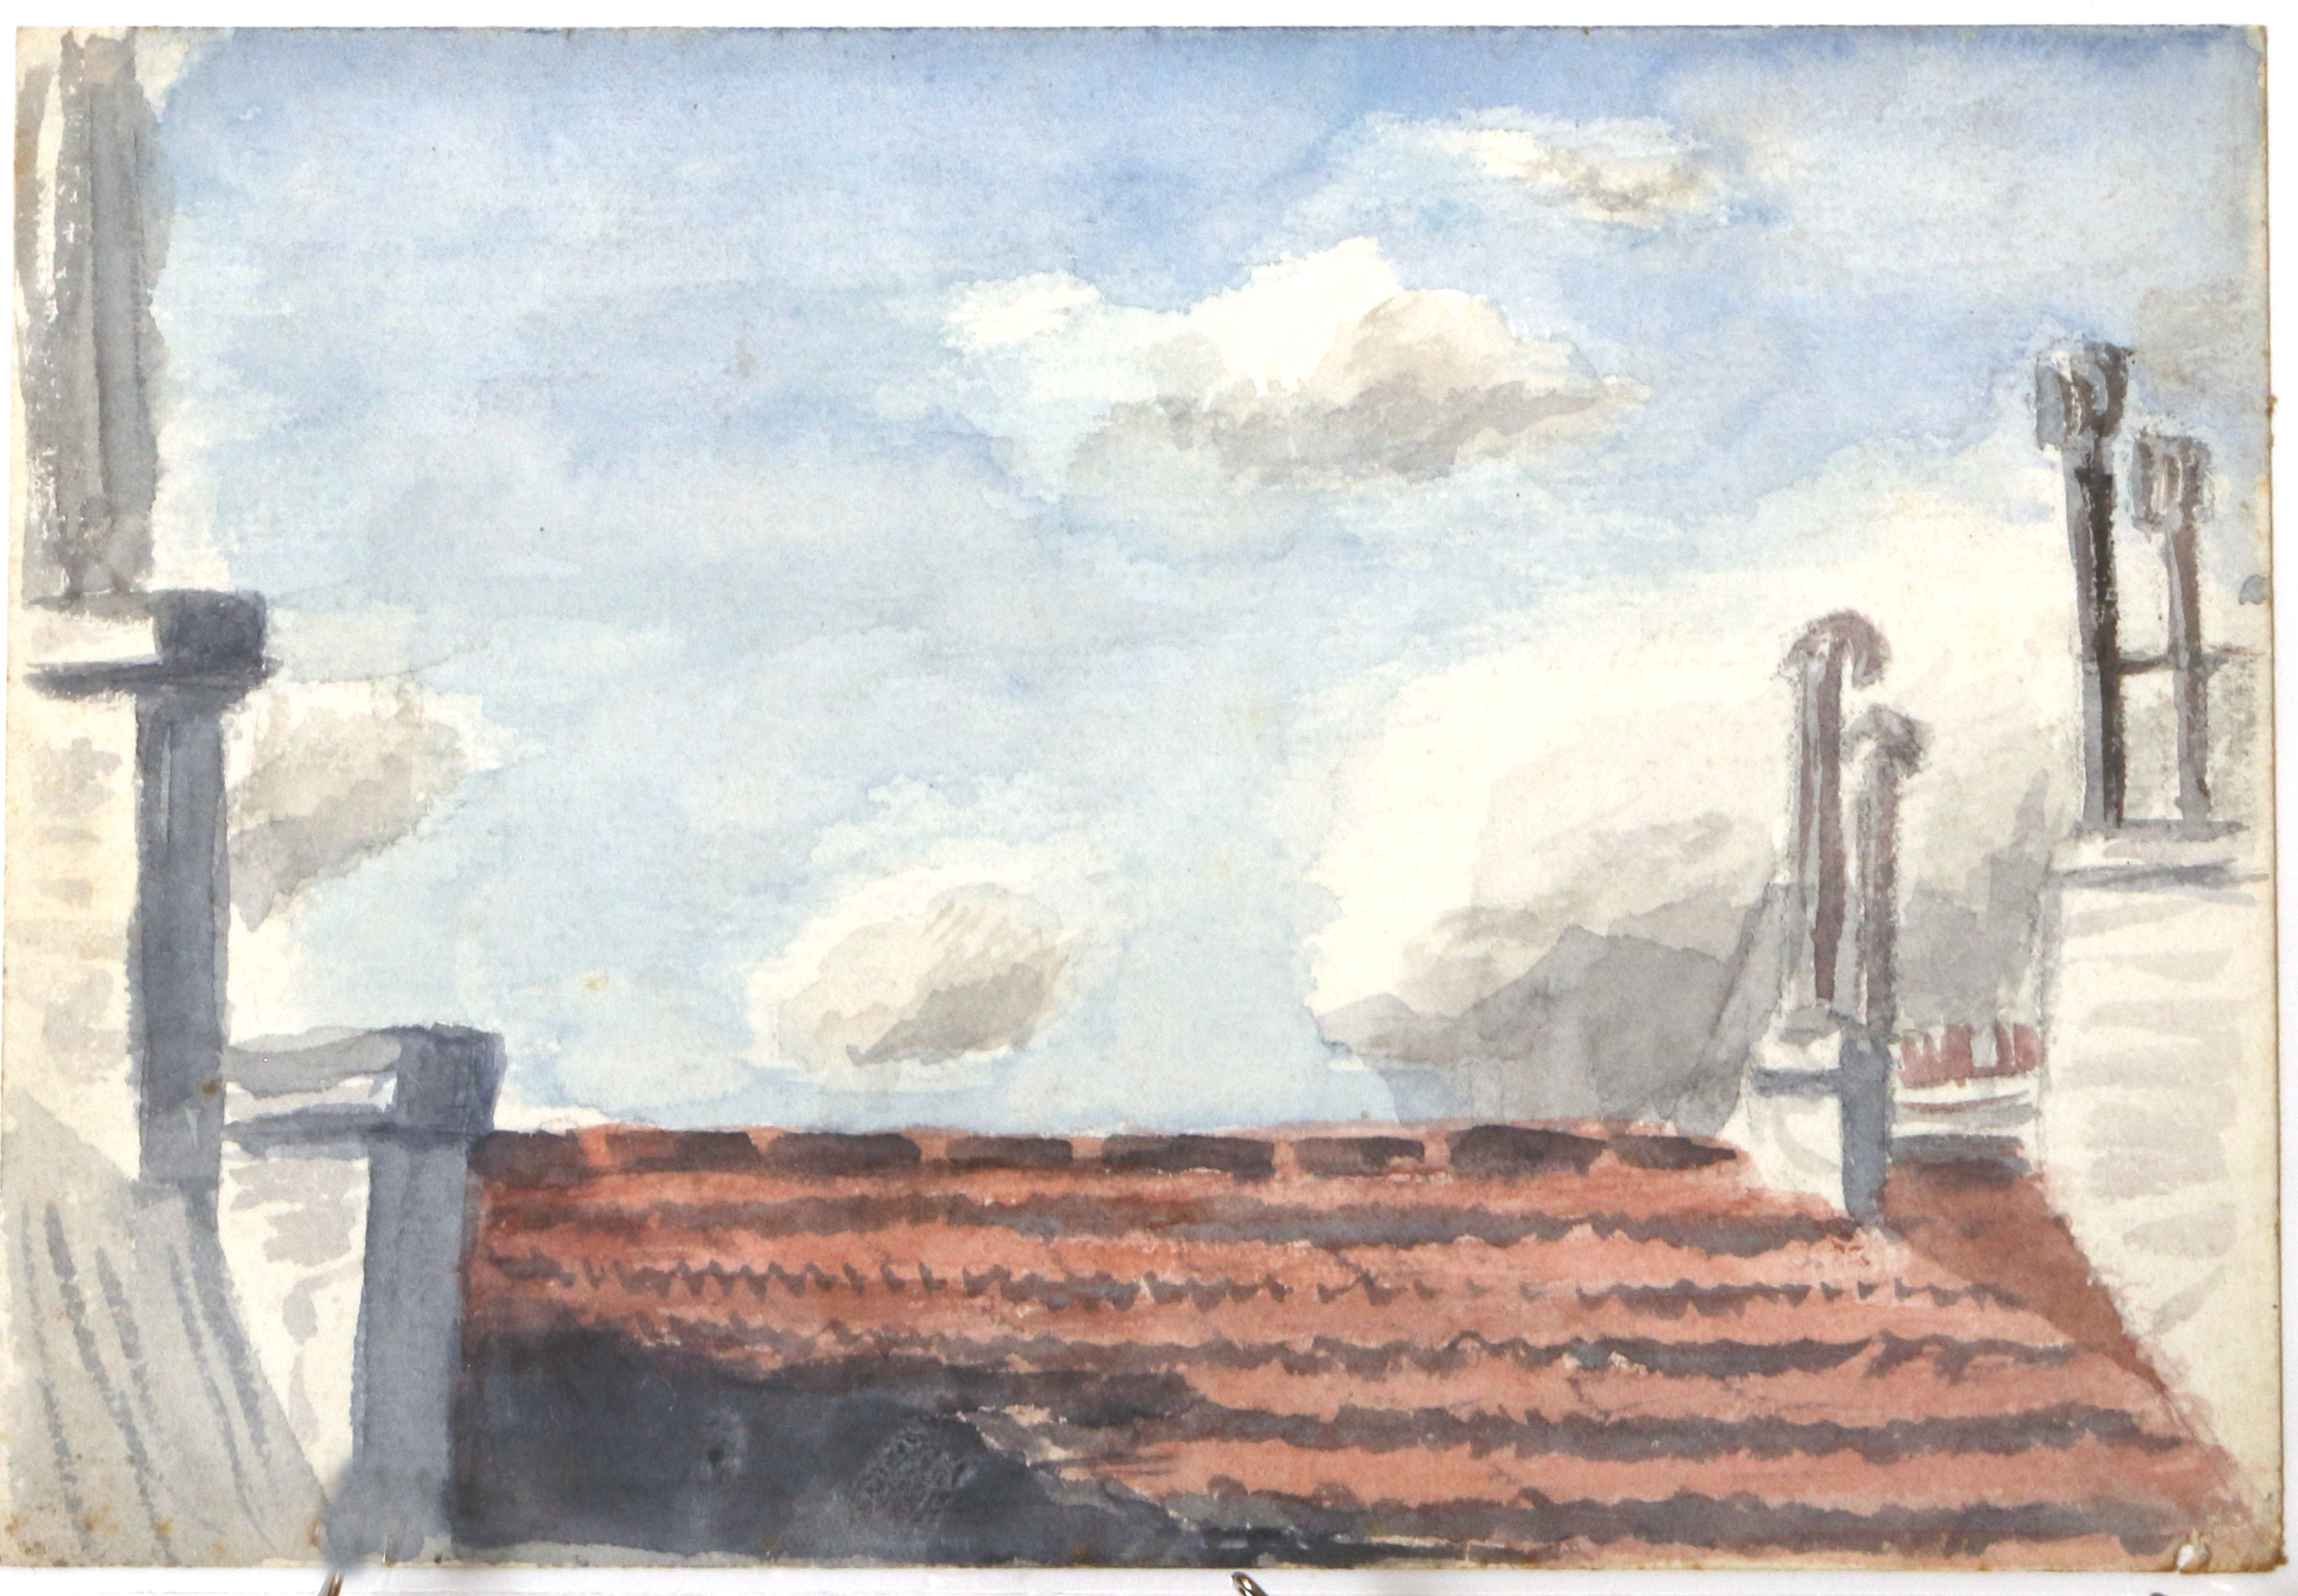 Watercolor.  Clear day with red roof at bottom center.  Jean Charlot.